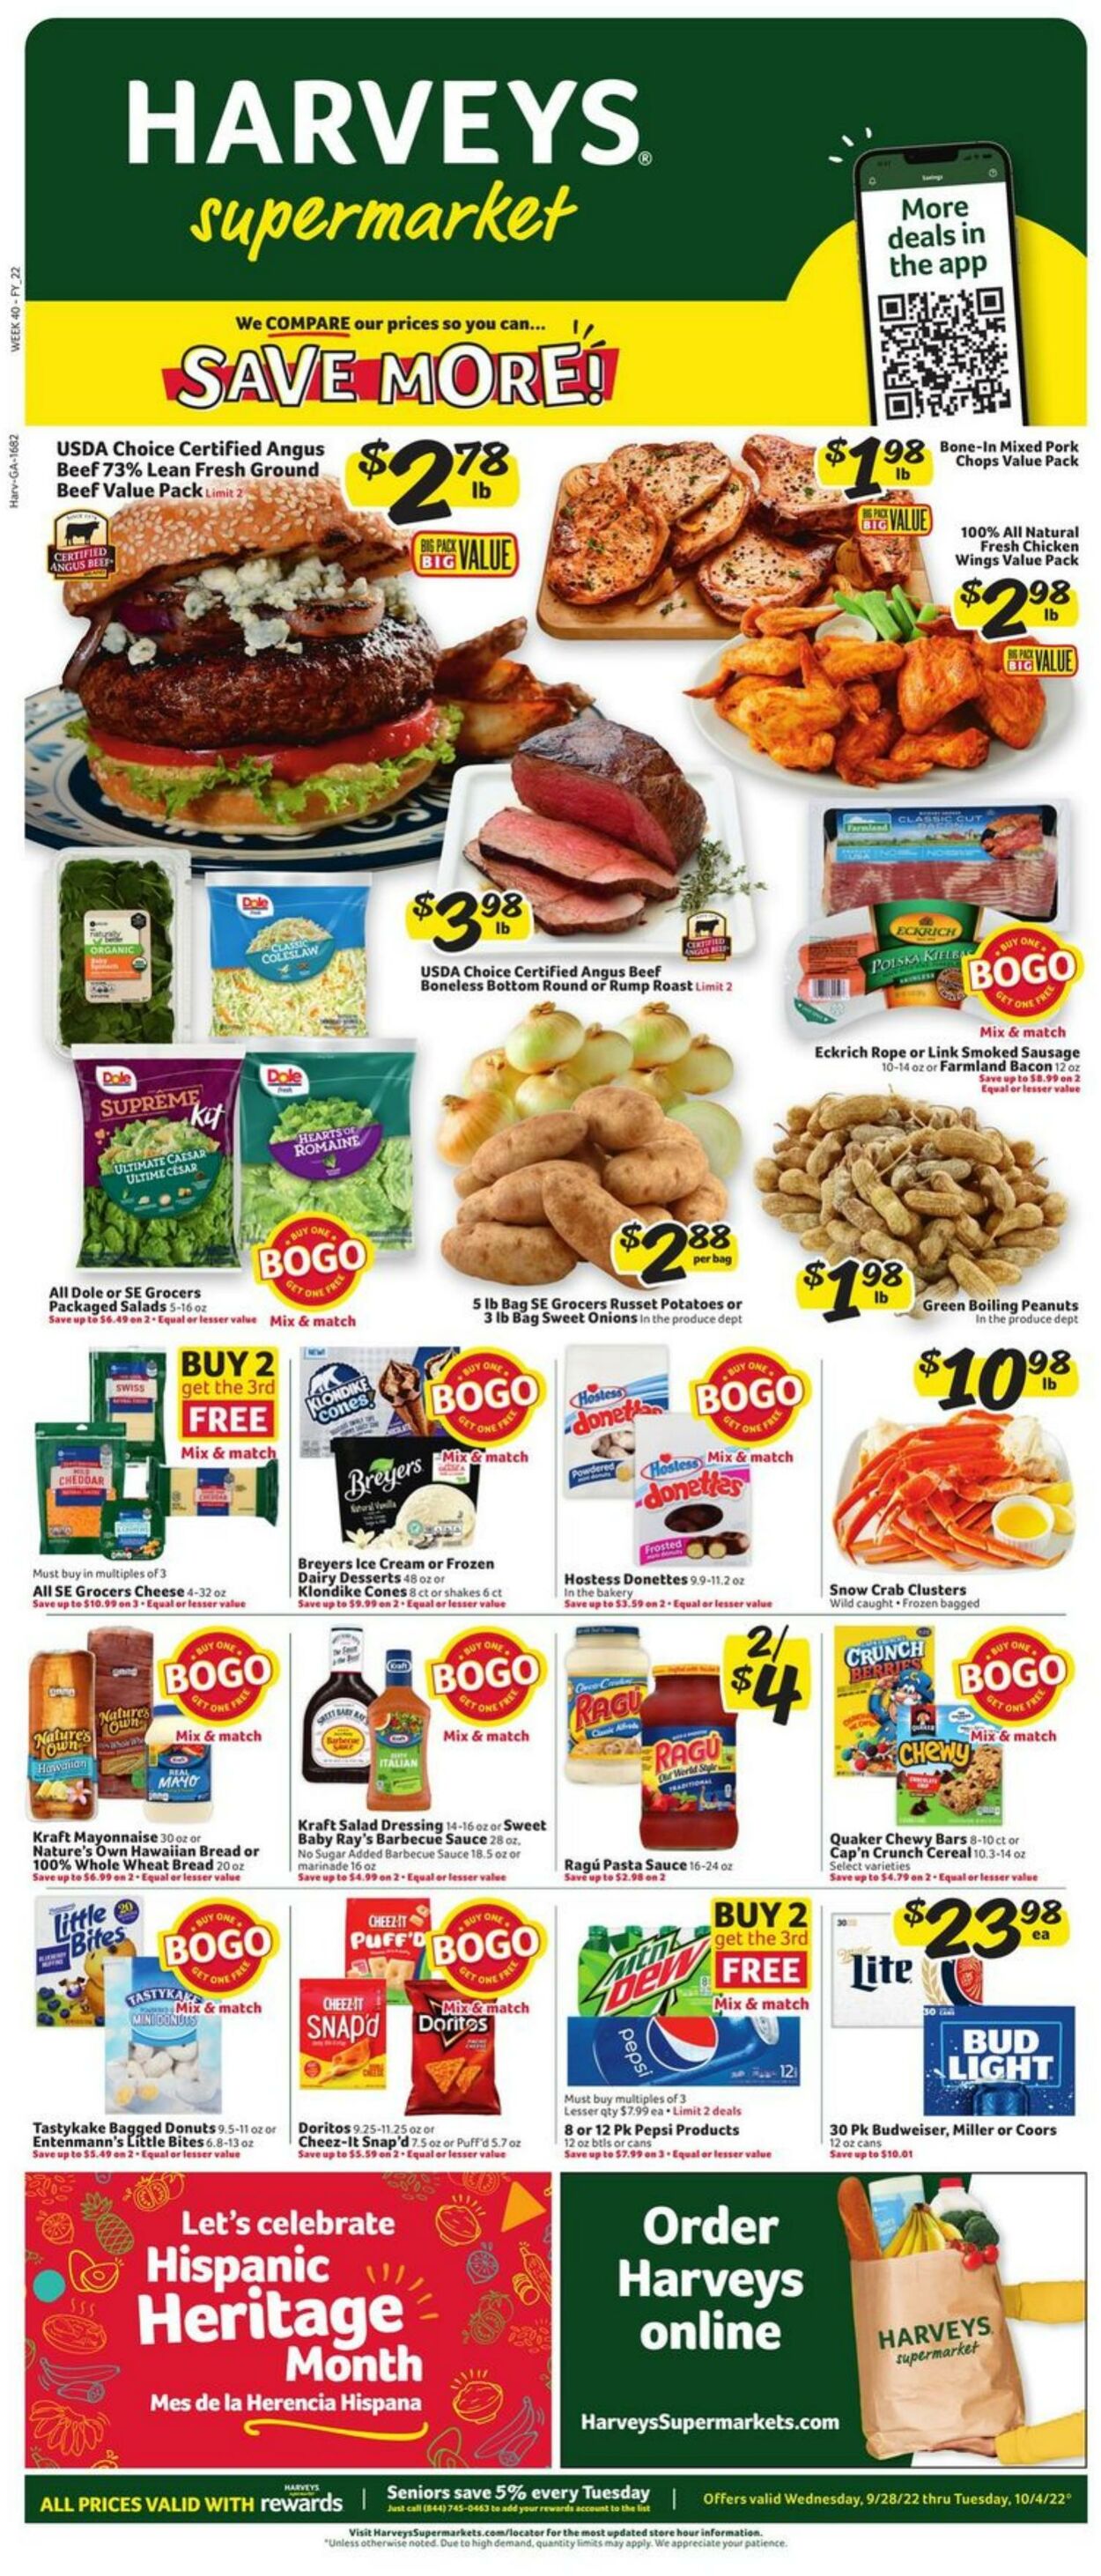 Harvey's Supermarkets Promotional weekly ads